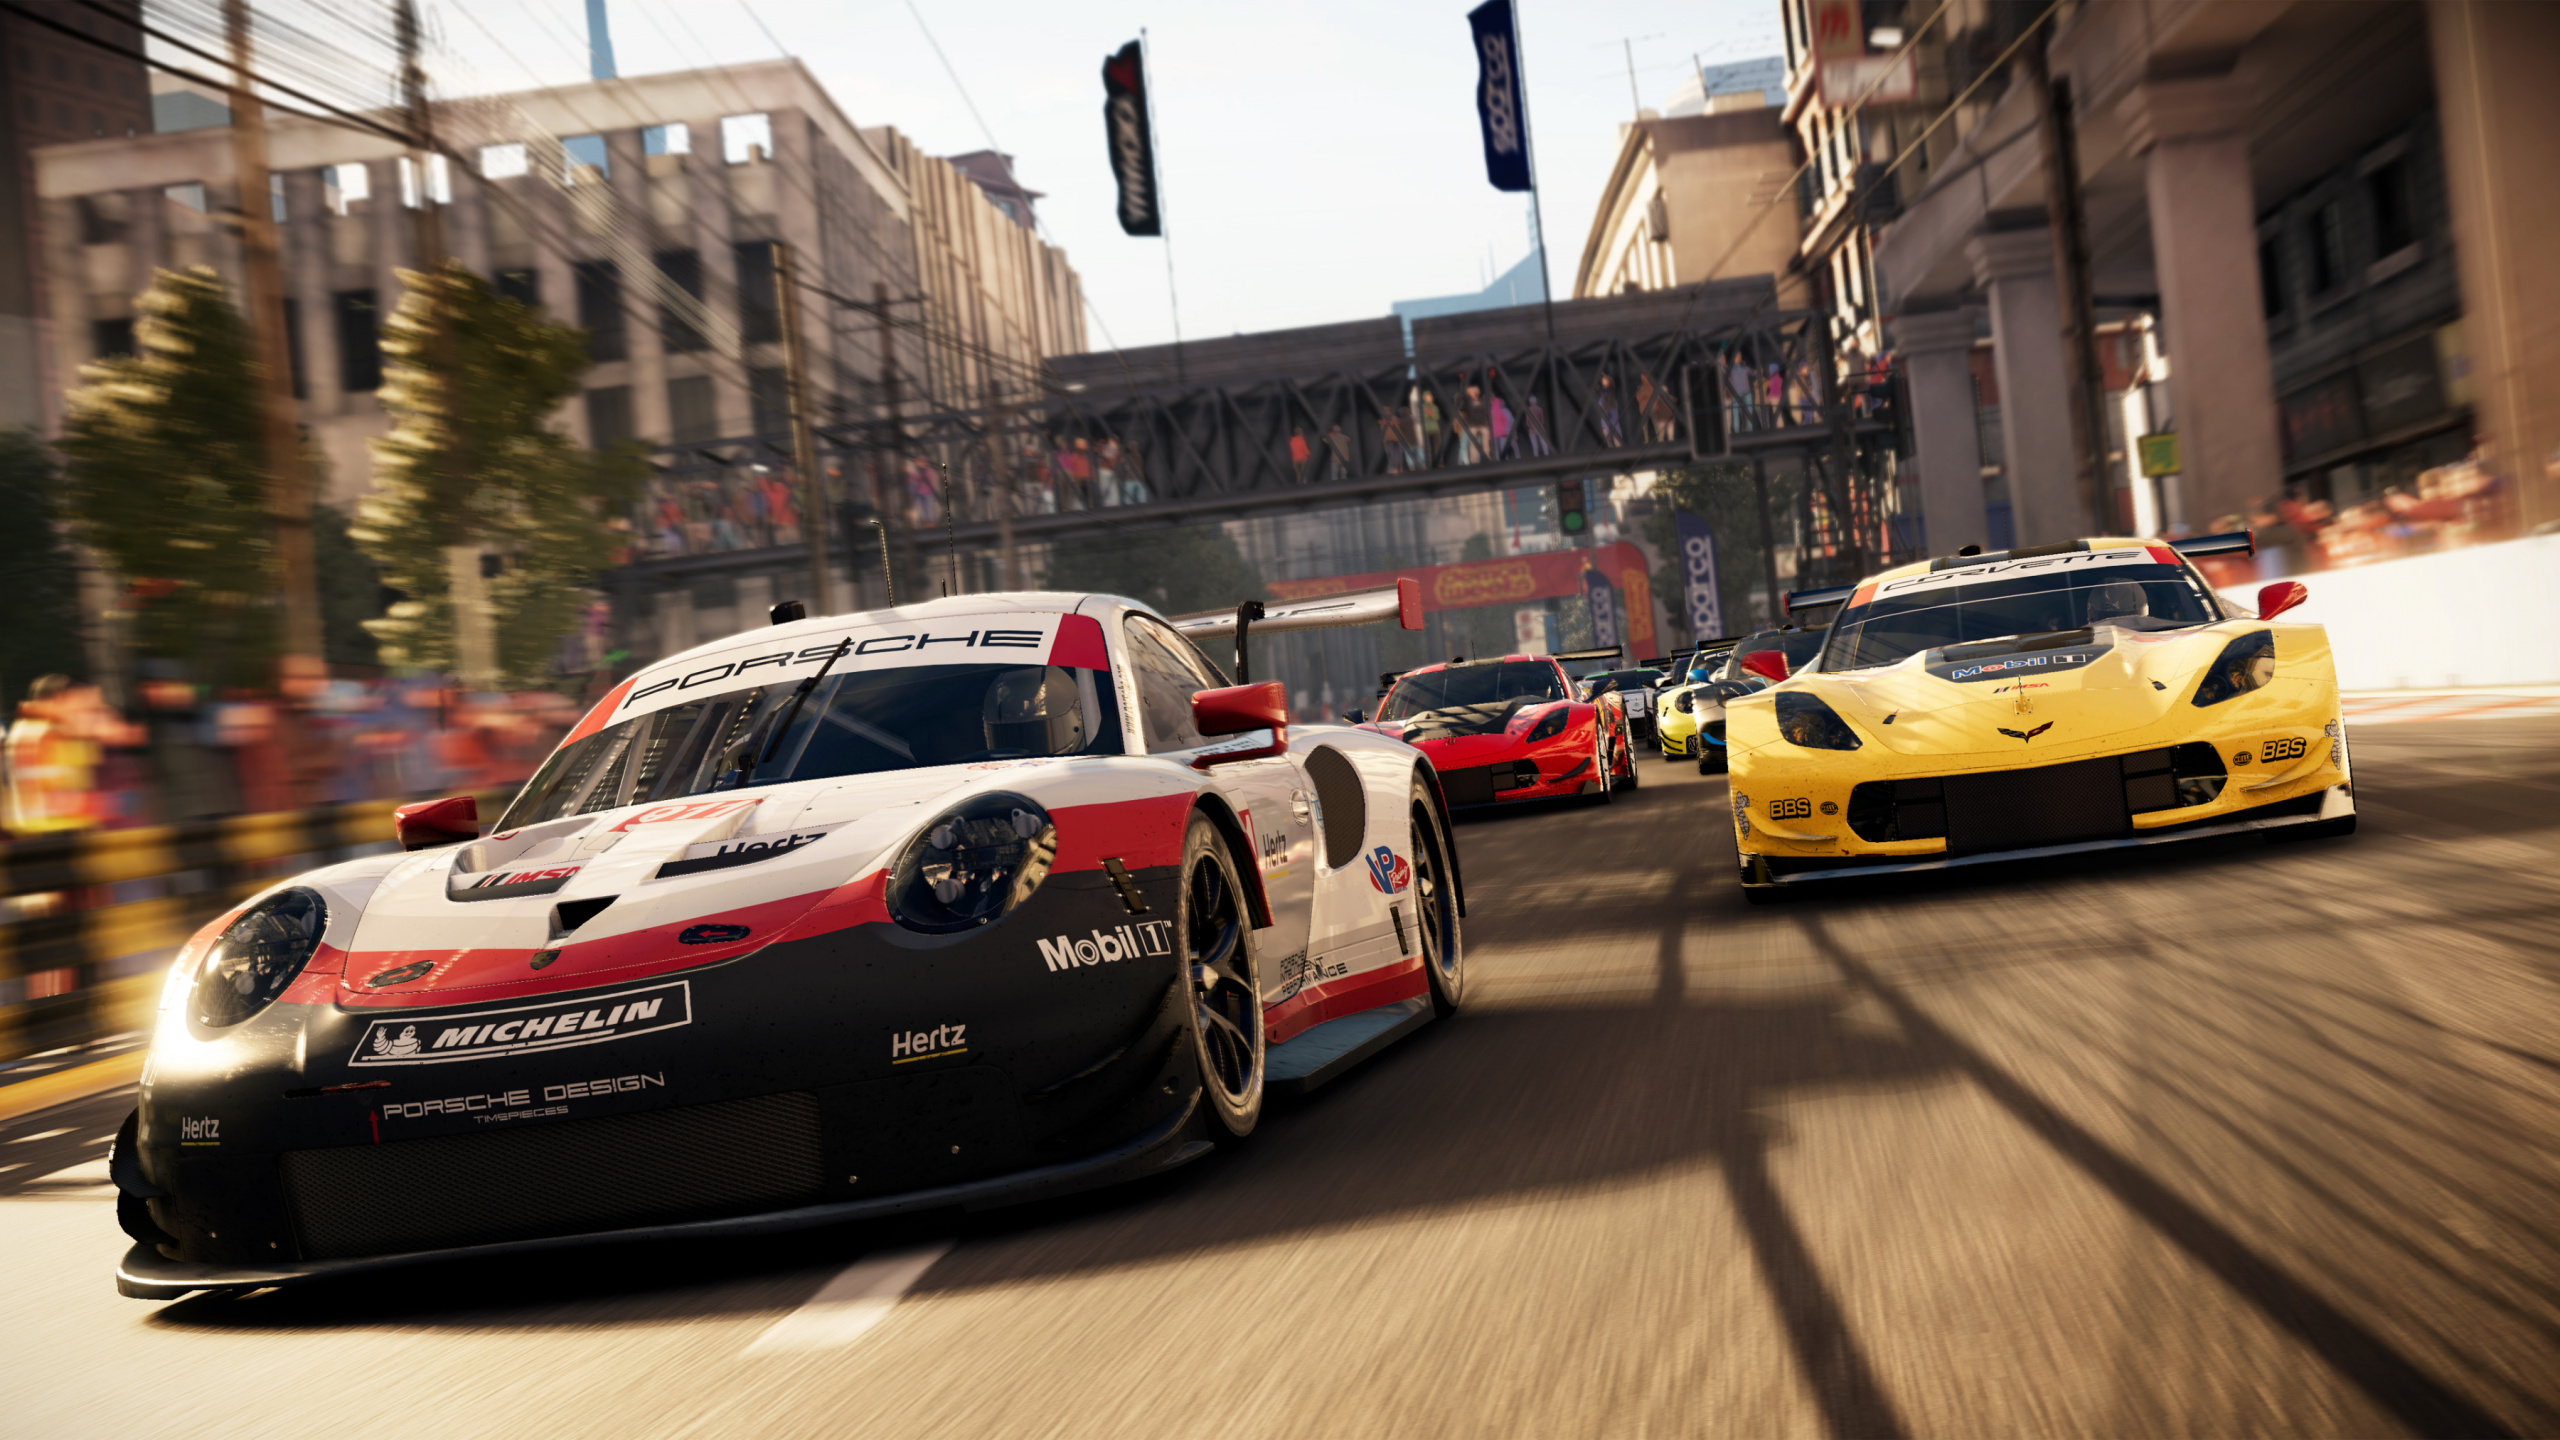 Grid, Codemasters, Racing, Playstation 4, Auto. Wallpaper in 2560x1440 Resolution